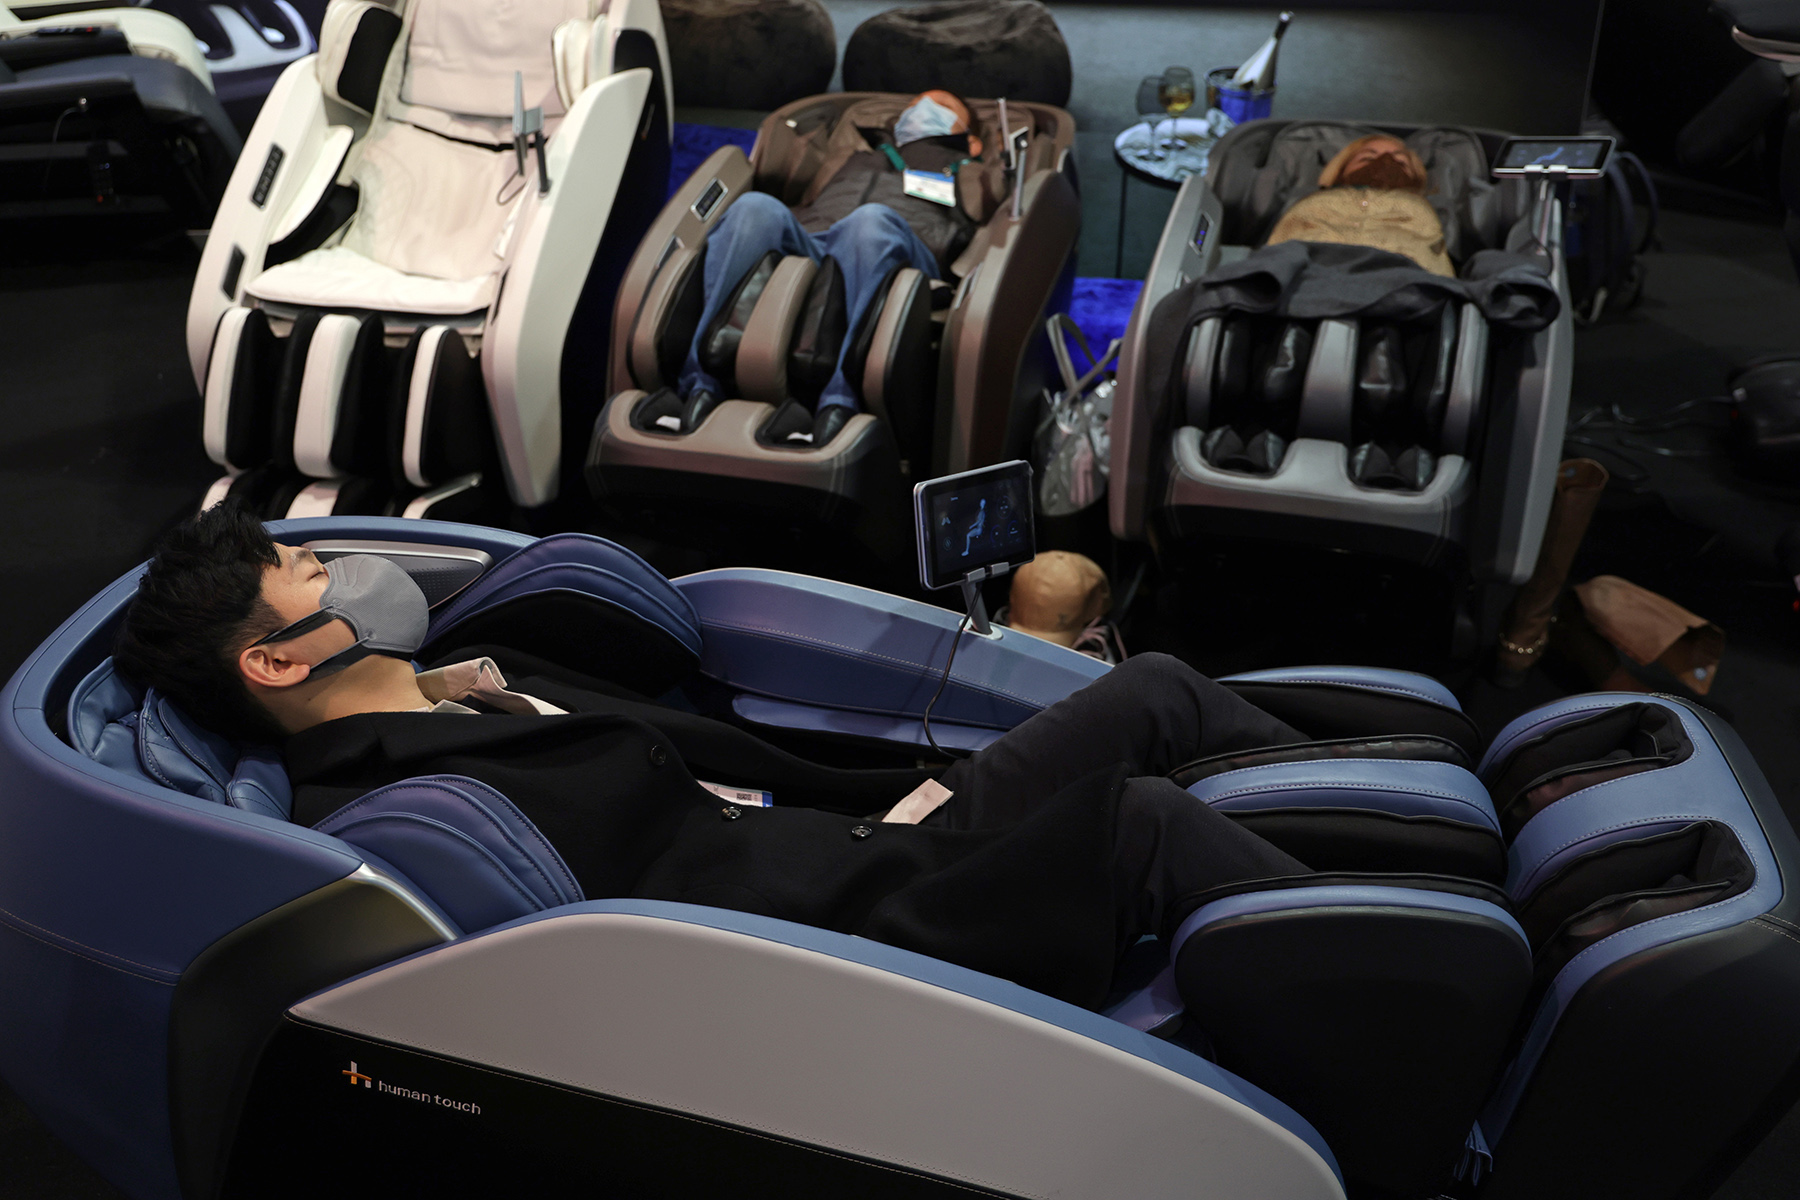 Attendees try out massage chairs at the Human Touch booth at CES 2022 at the Las Vegas Convention Center